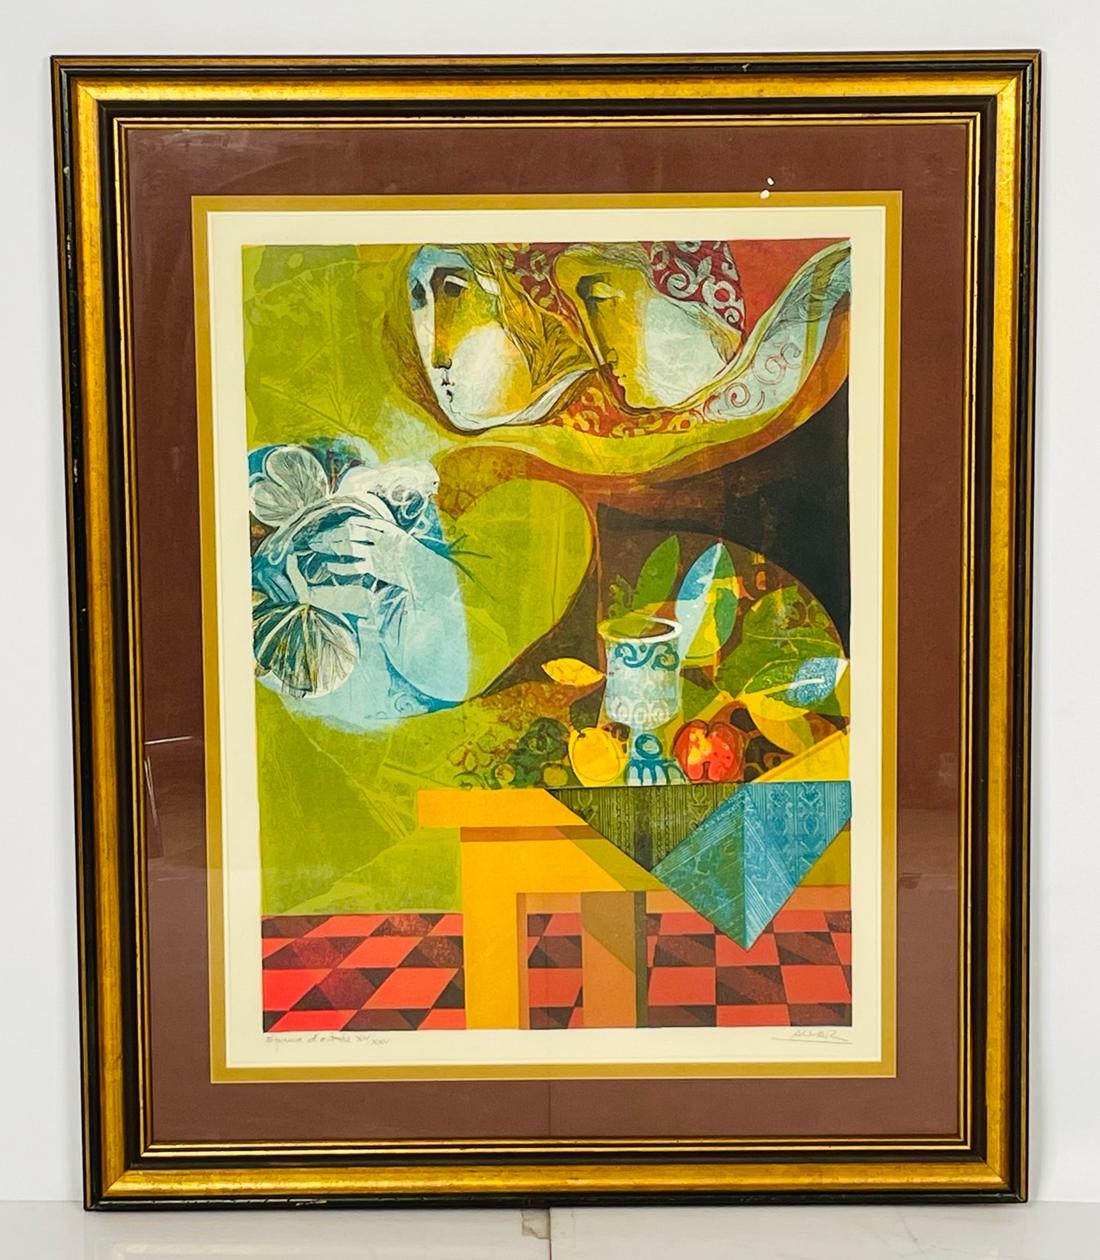 Àlvar Suñol Munoz-Ramos (Spanish, born 1935)
Intérieur Rêve (Interior Dream), late 20th century
Color lithograph on paper
Signed to the lower right margin
Artist proof edition numbered 14 of 25
From the artist’s Le Miracle Quotidien